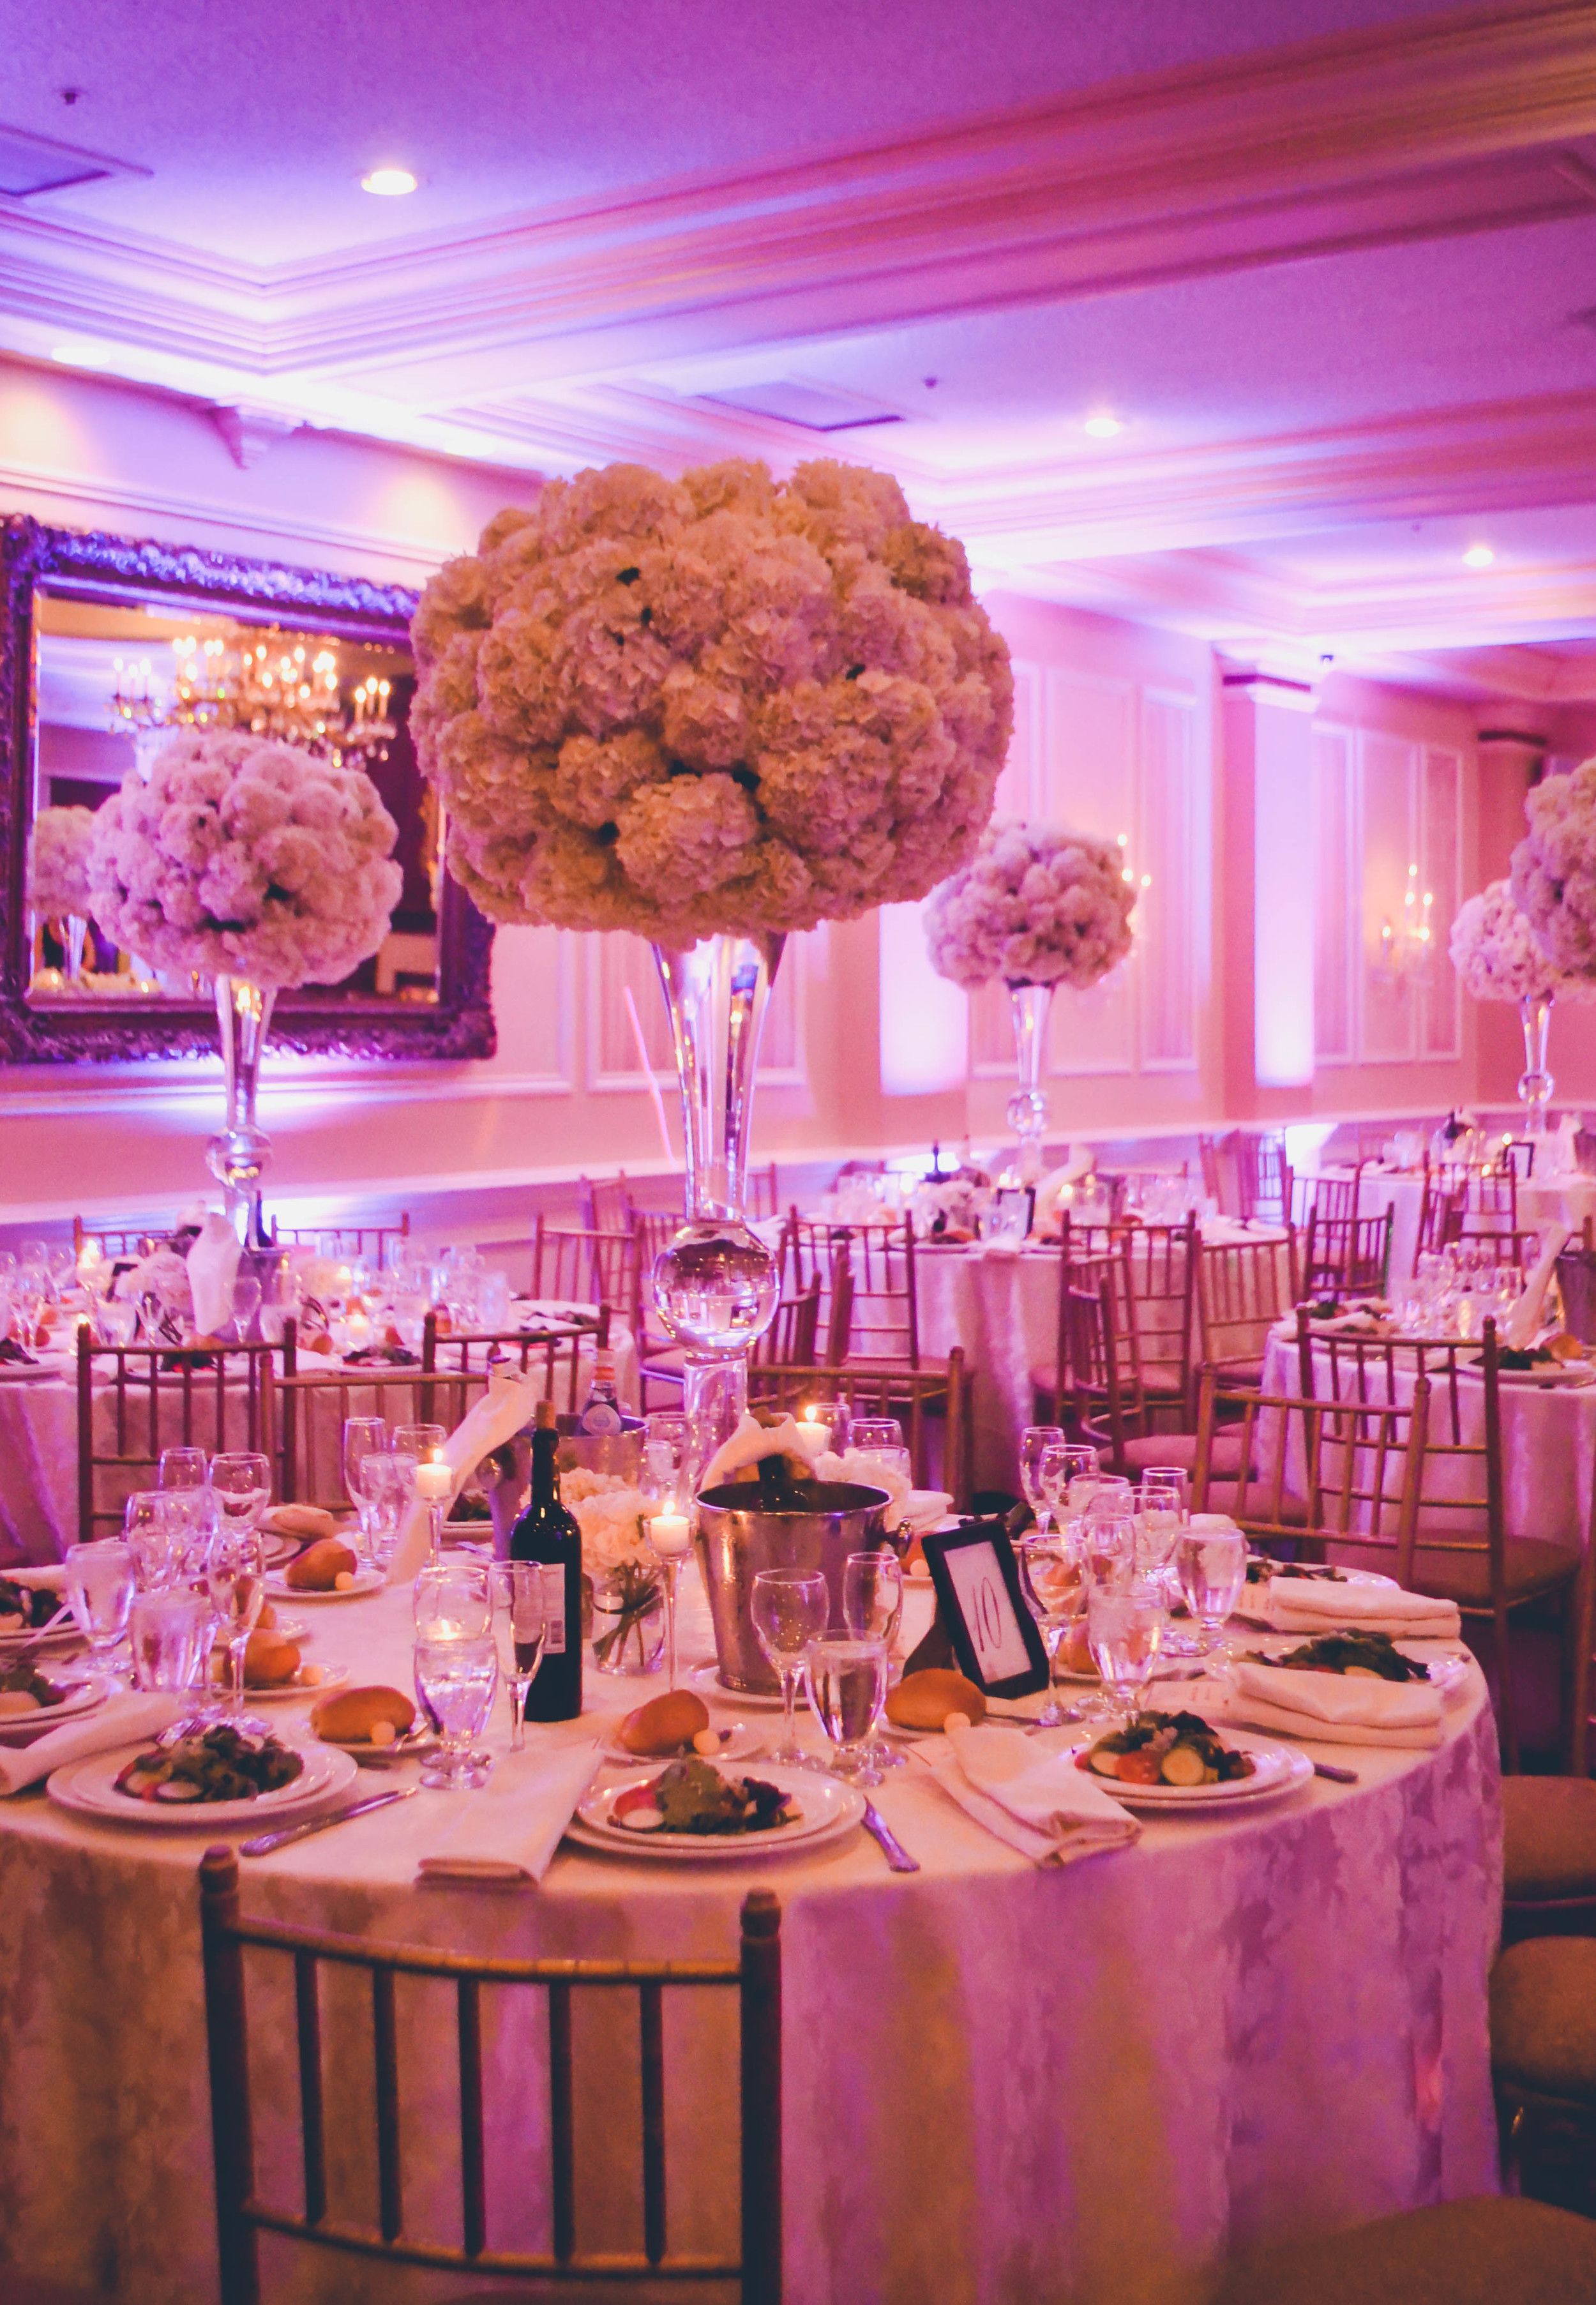 Extra large white hydrangea centerpieces in tall trumpet vases. Inn at New Hyde Park. Long Island. Rosehip Social, Brooklyn, NY.